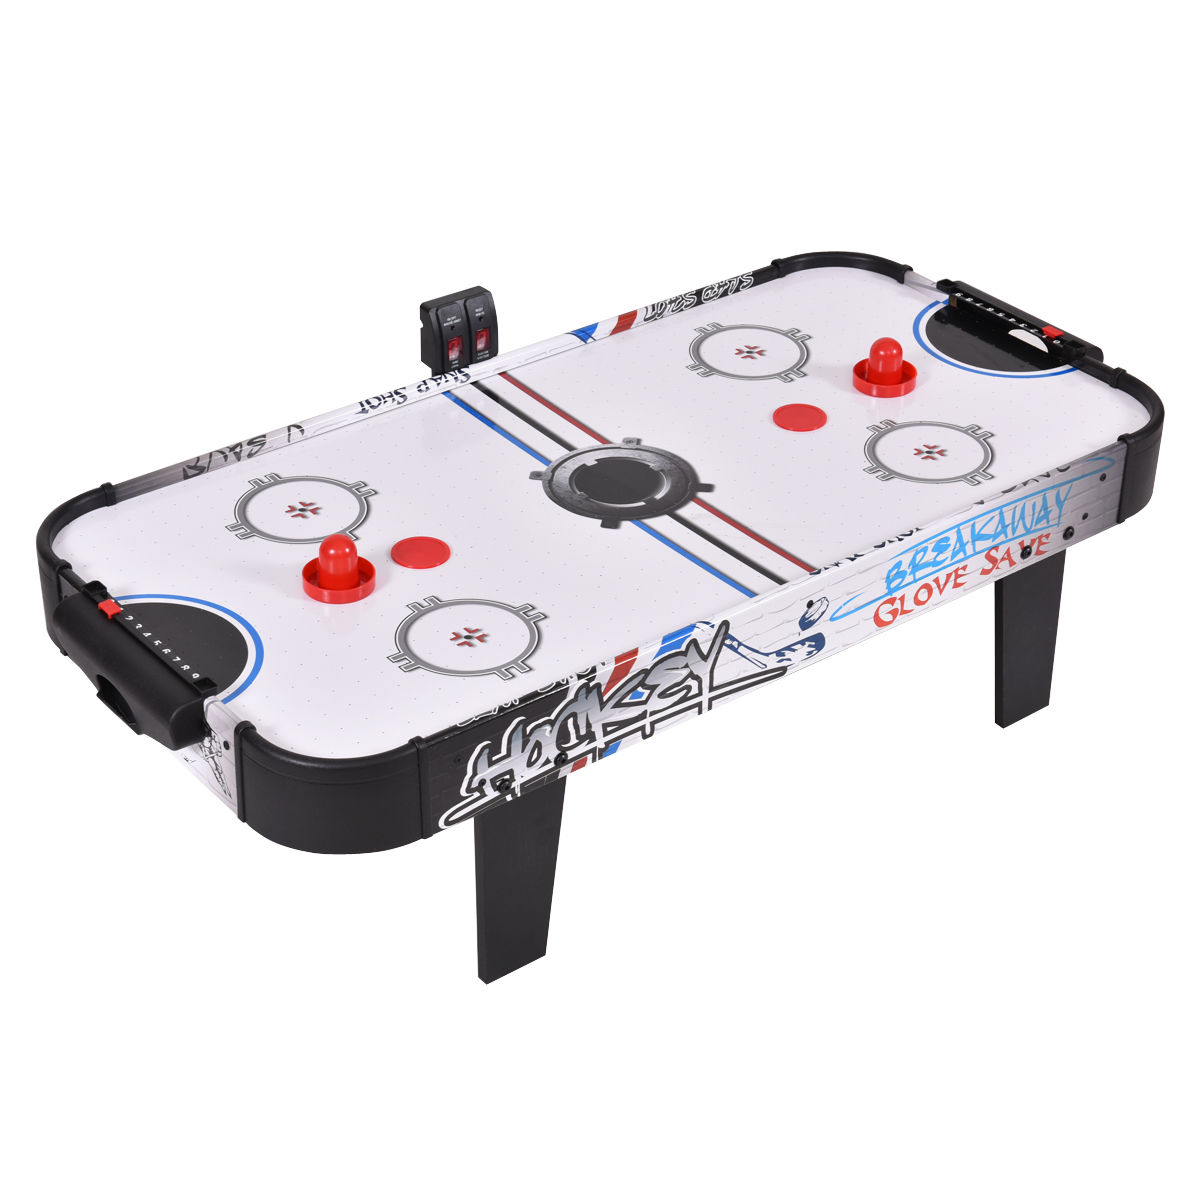 Costway 42''Air Powered Hockey Table Game Room Indoor Sport Electronic Scoring 2 Pushers - image 2 of 9